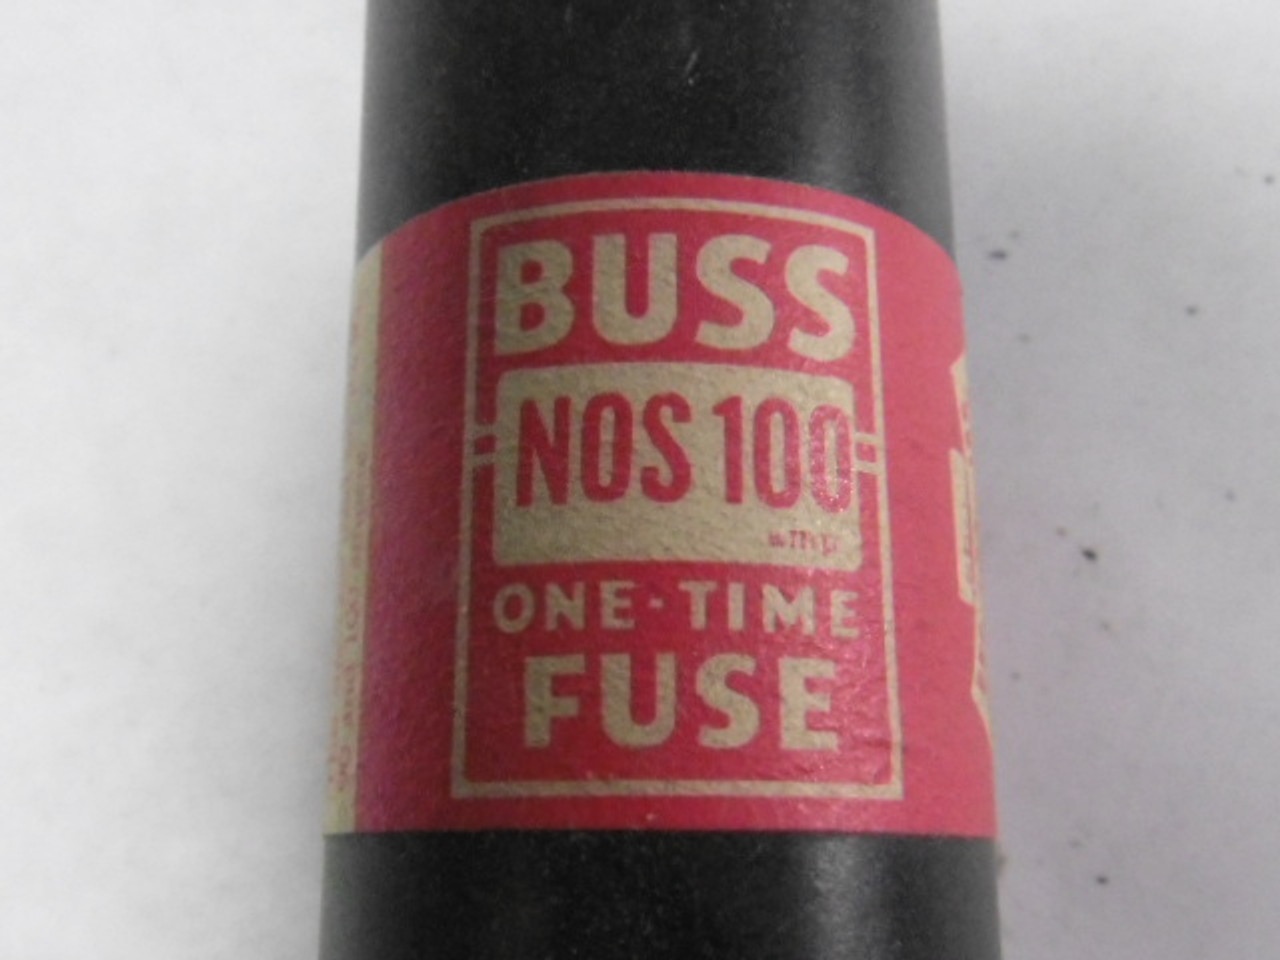 Bussmann NOS-100 One Time Fuse 100A 600V USED